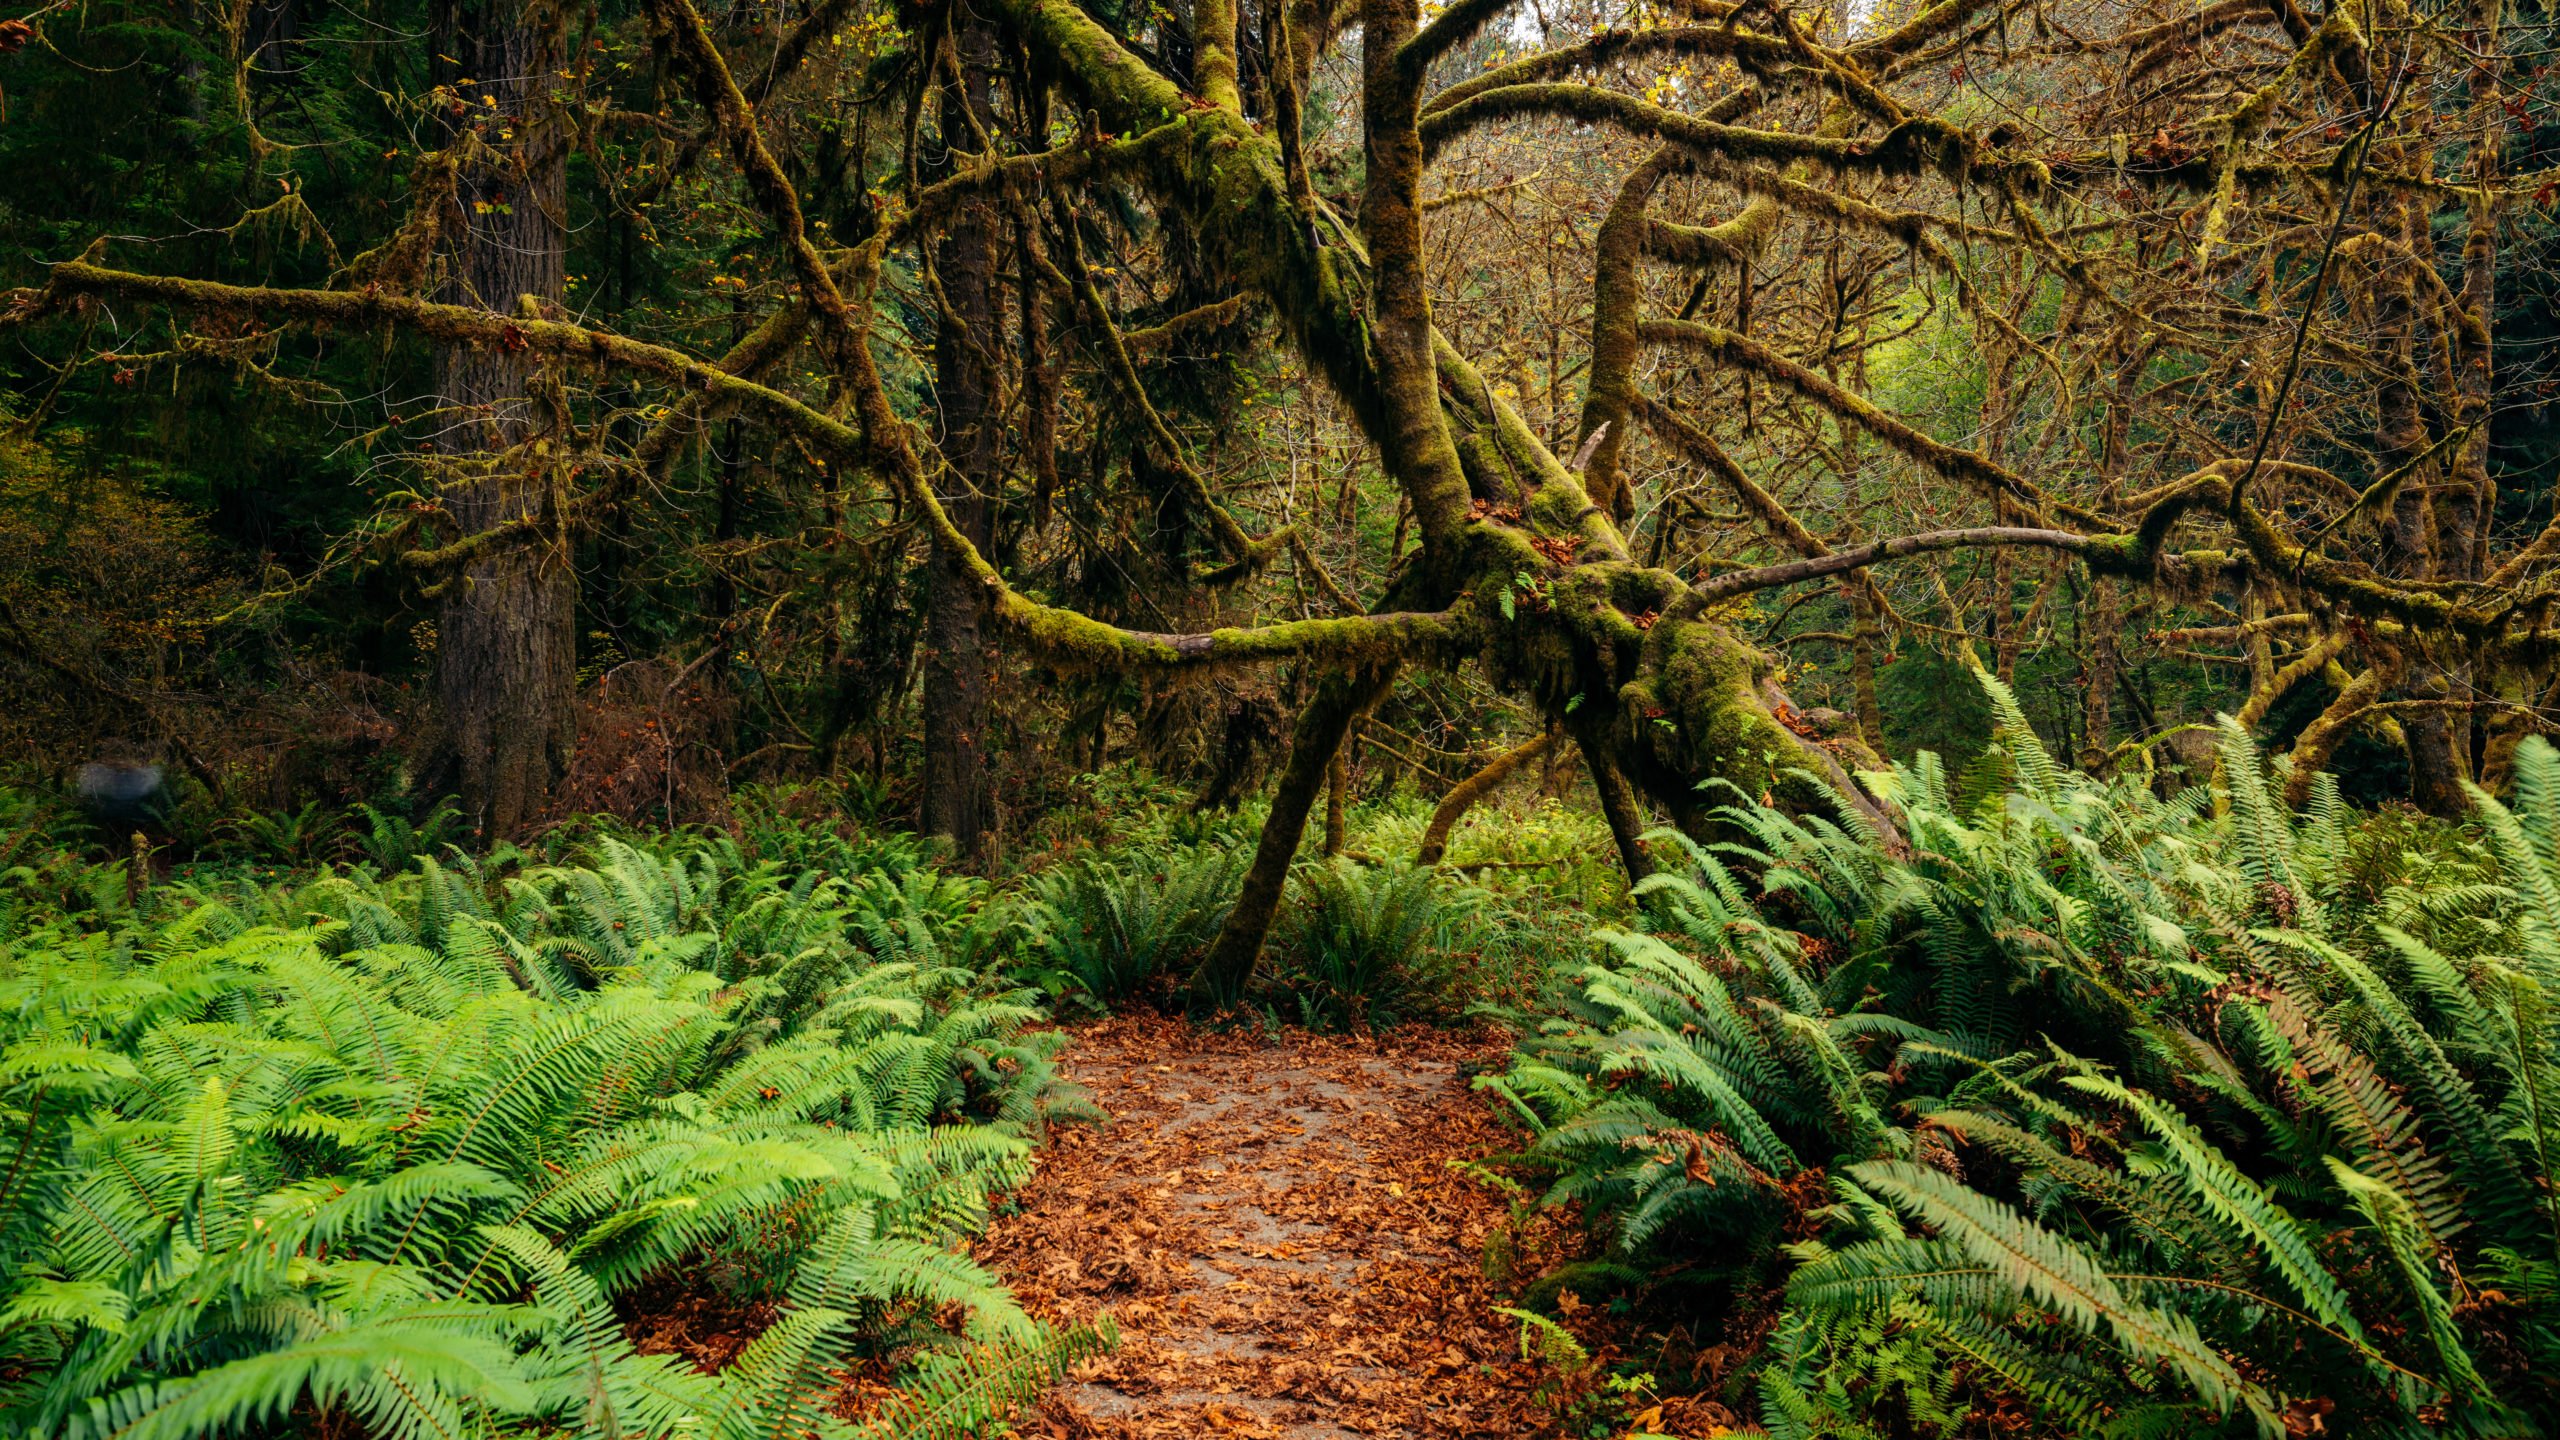 Redwood National Park: Photographing This Iconic Forest